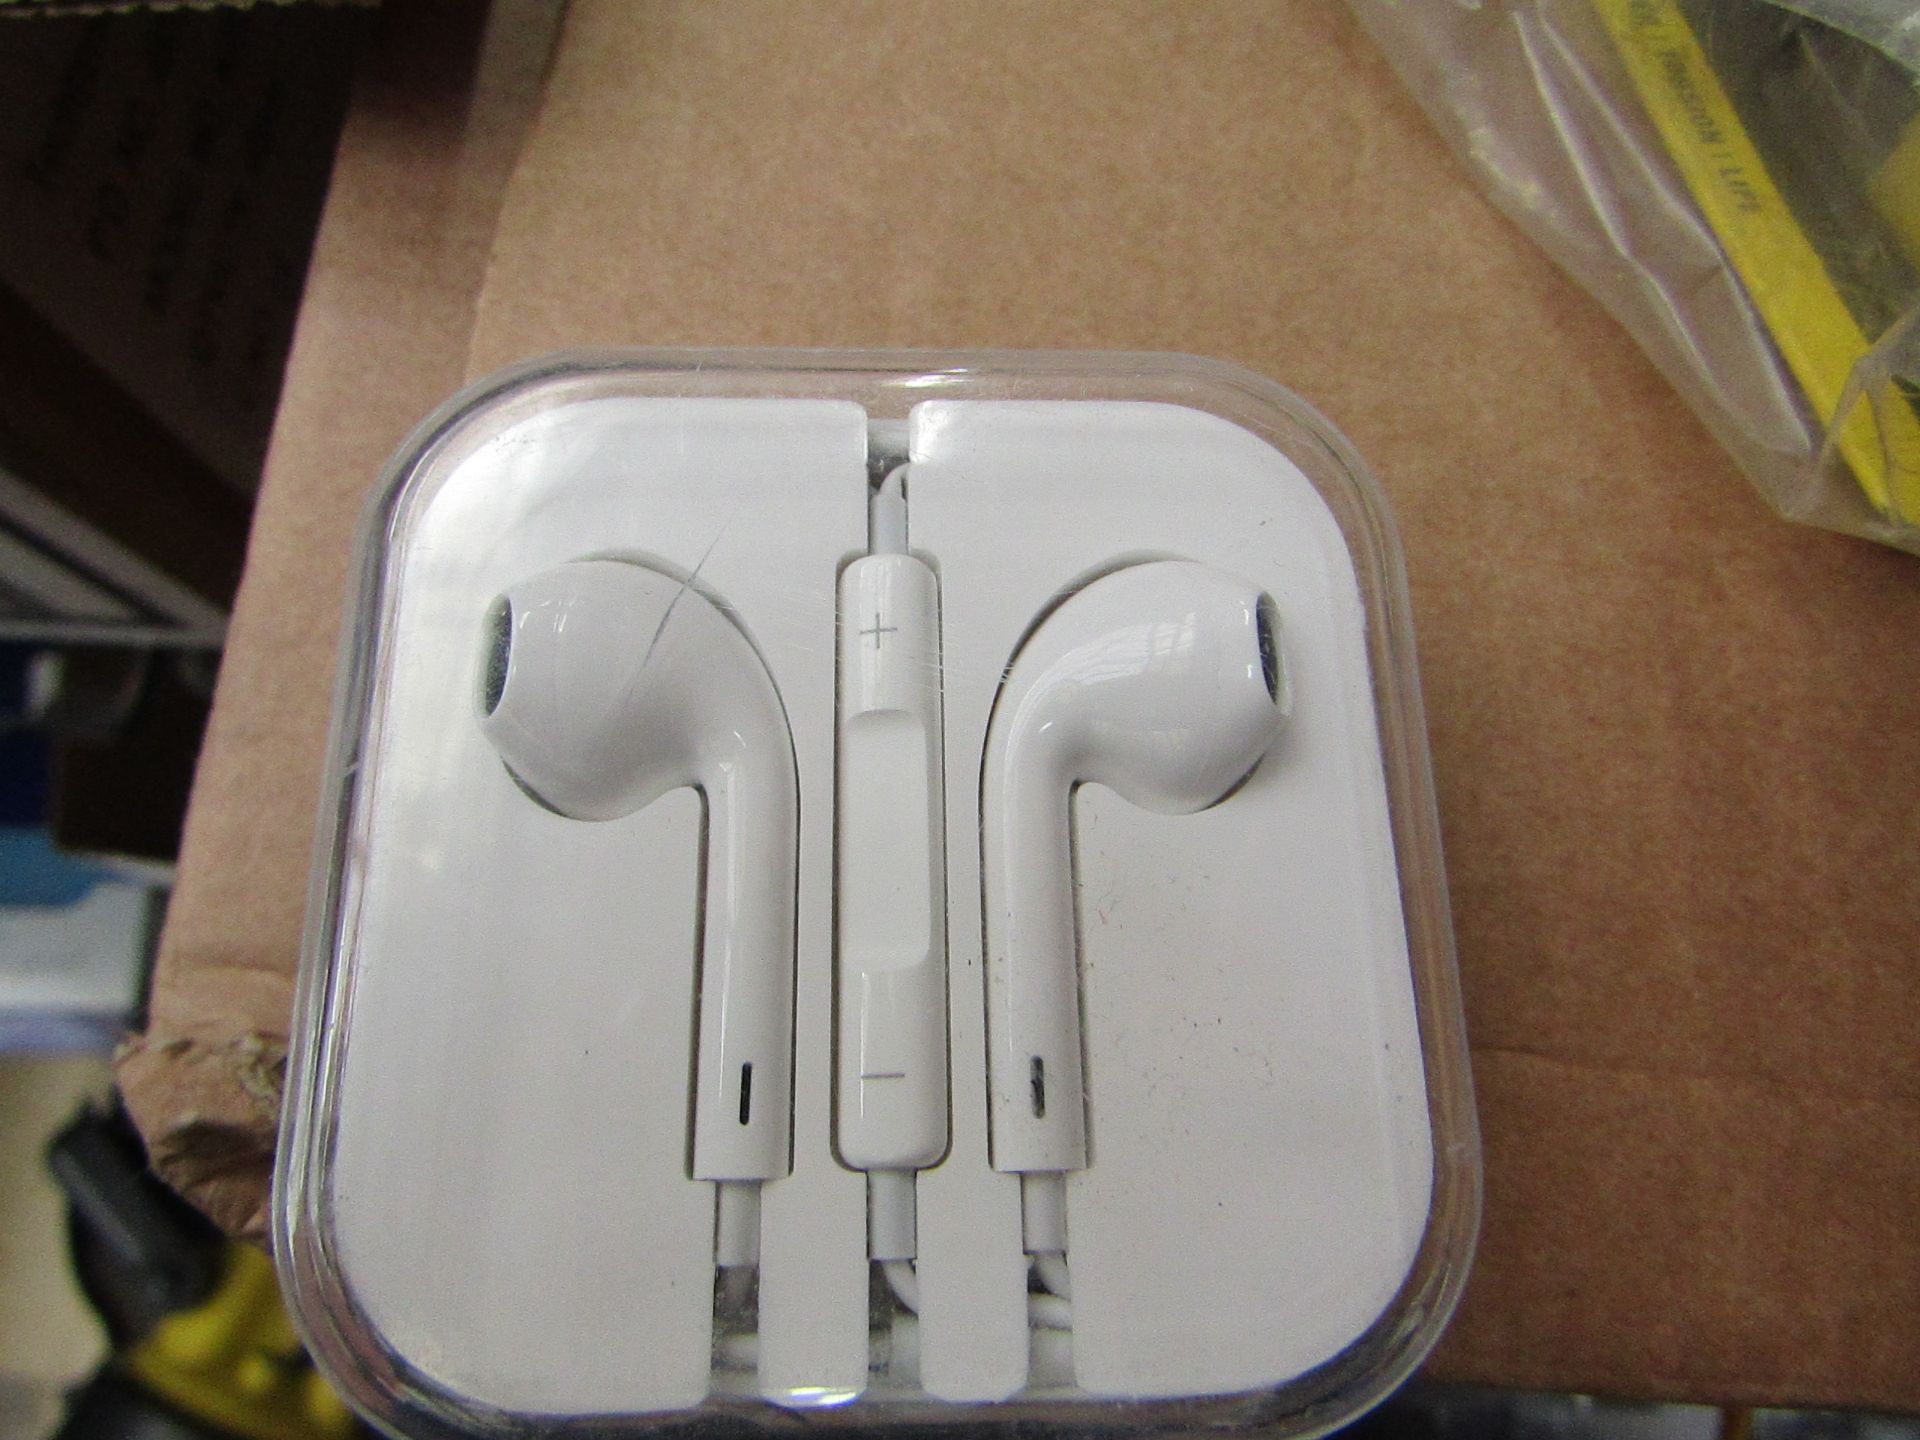 5 x of Apple earphones , untested and packaged.